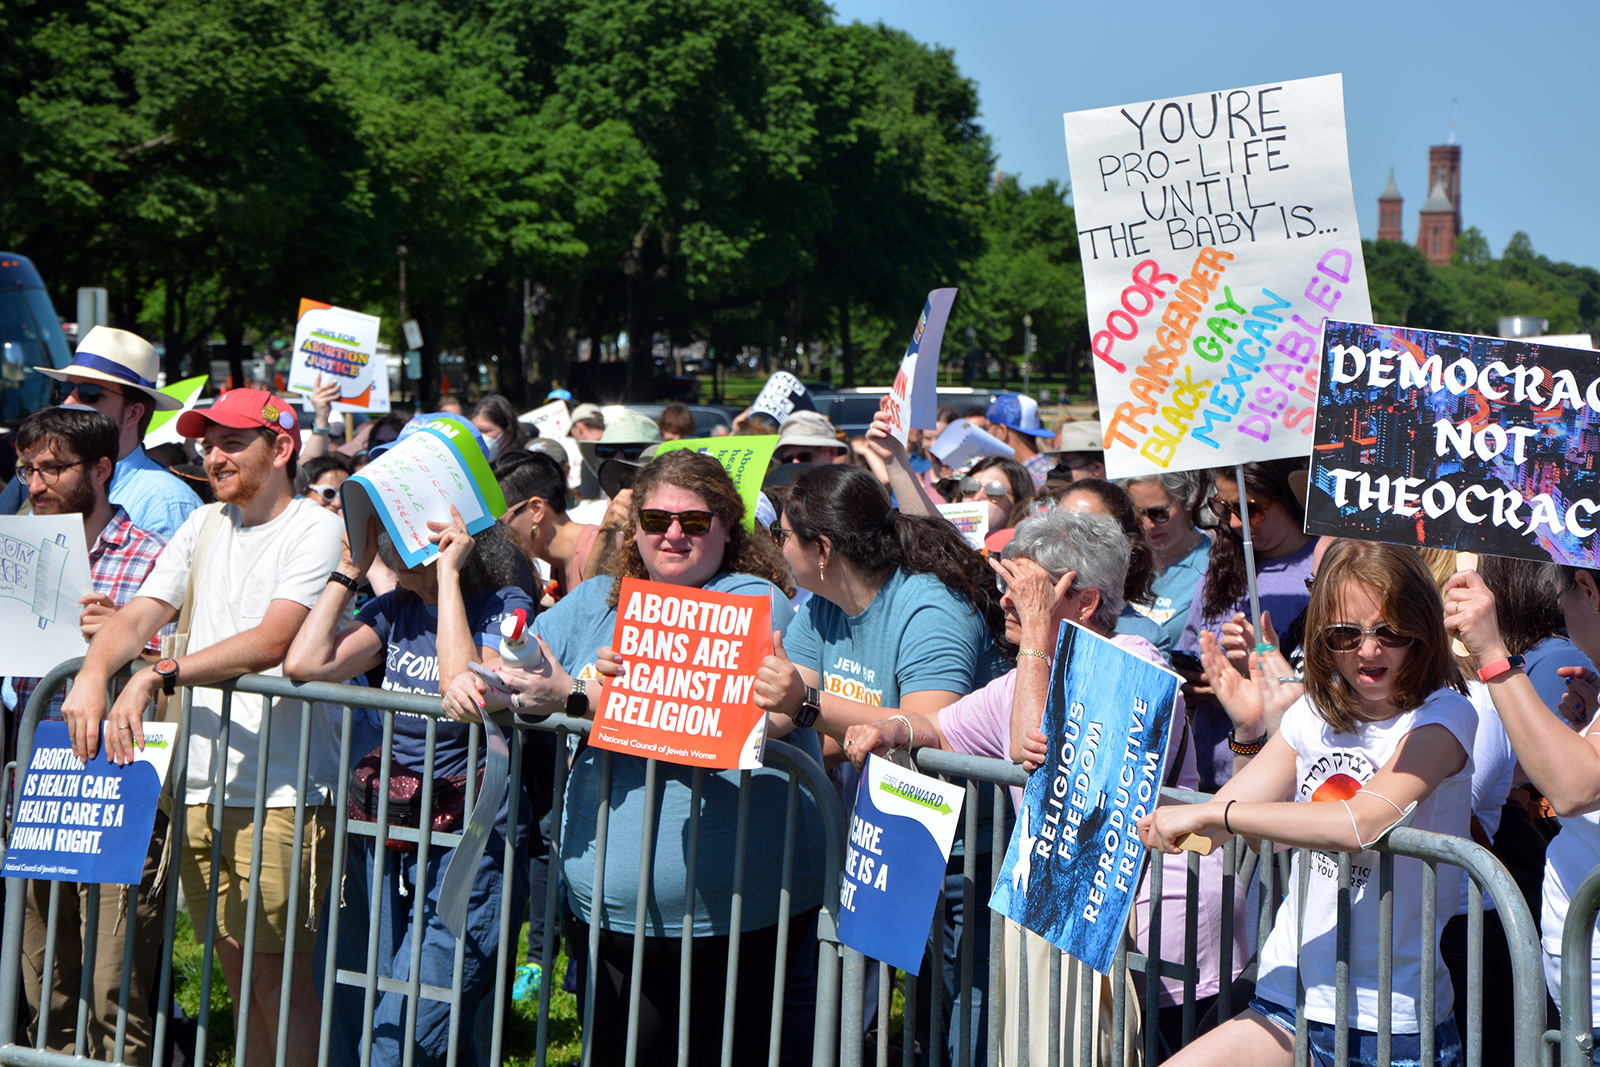 People attend the Jewish Rally for Abortion Justice on the National Mall, Tuesday, May 17, 2022, in Washington. RNS photo by Jack Jenkins